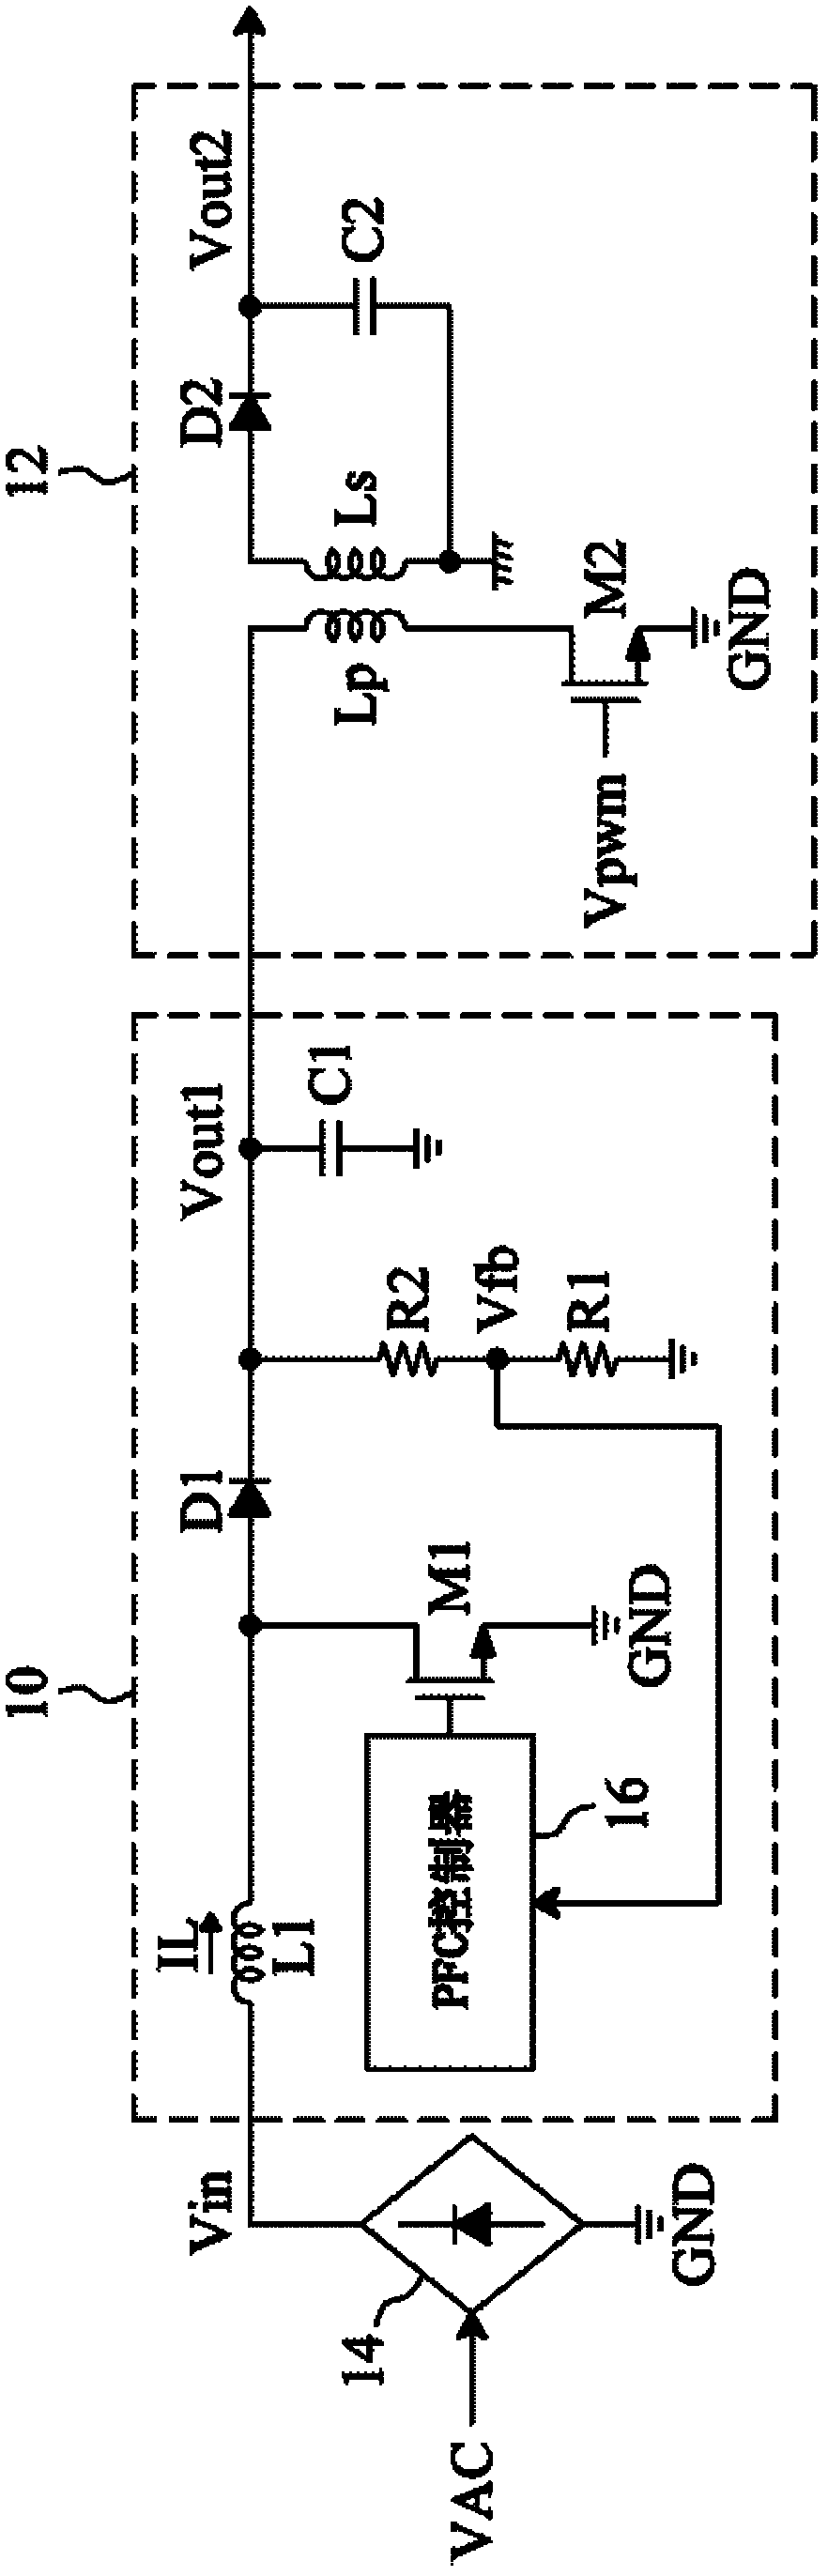 Tracking boost device used for power factor correction circuit and method